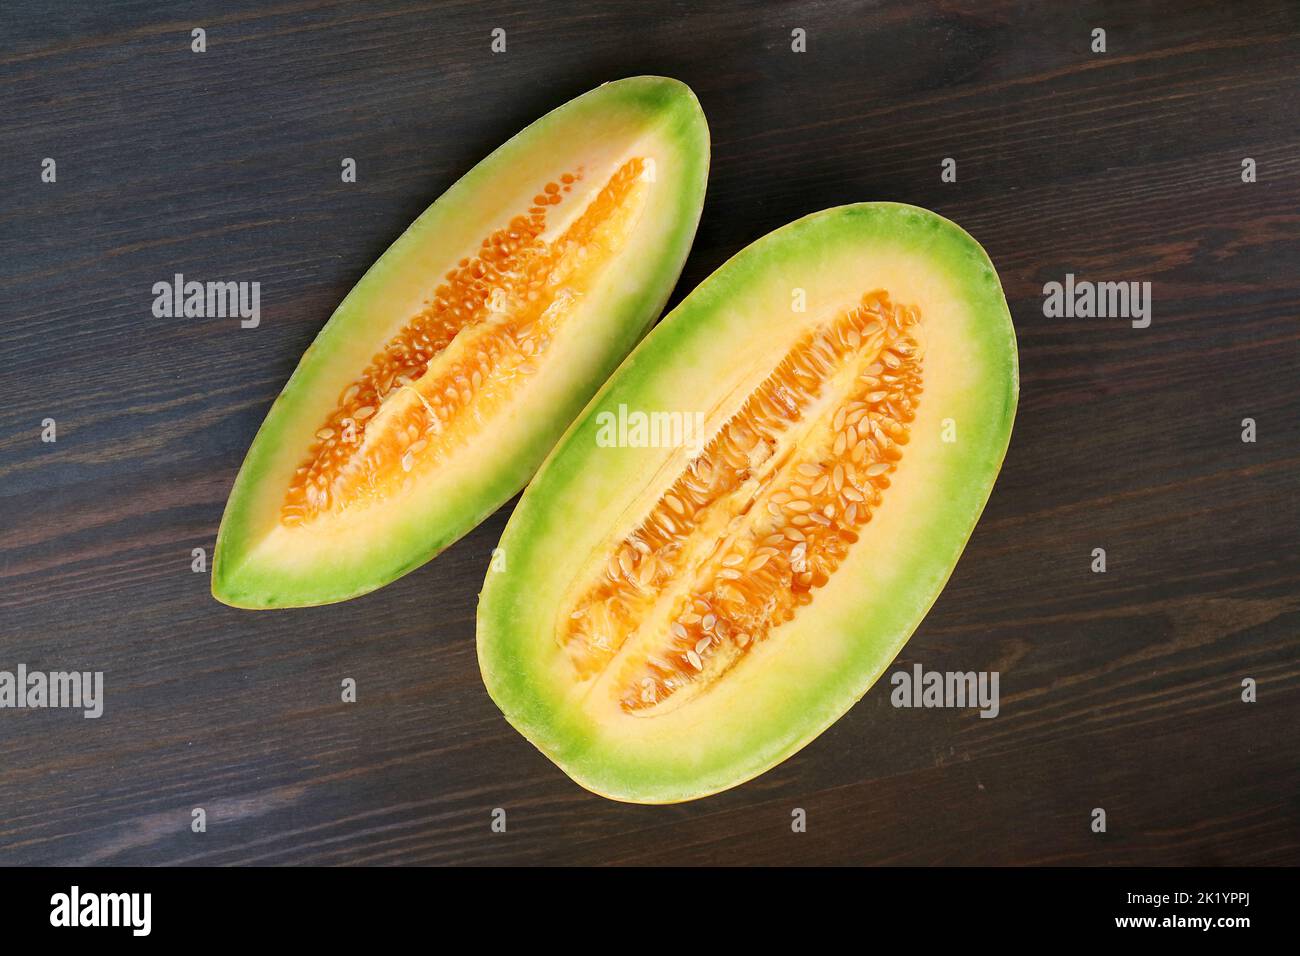 Top View of Slices of Juicy Fresh Ripe Thai Melon on Black Wooden Table Stock Photo